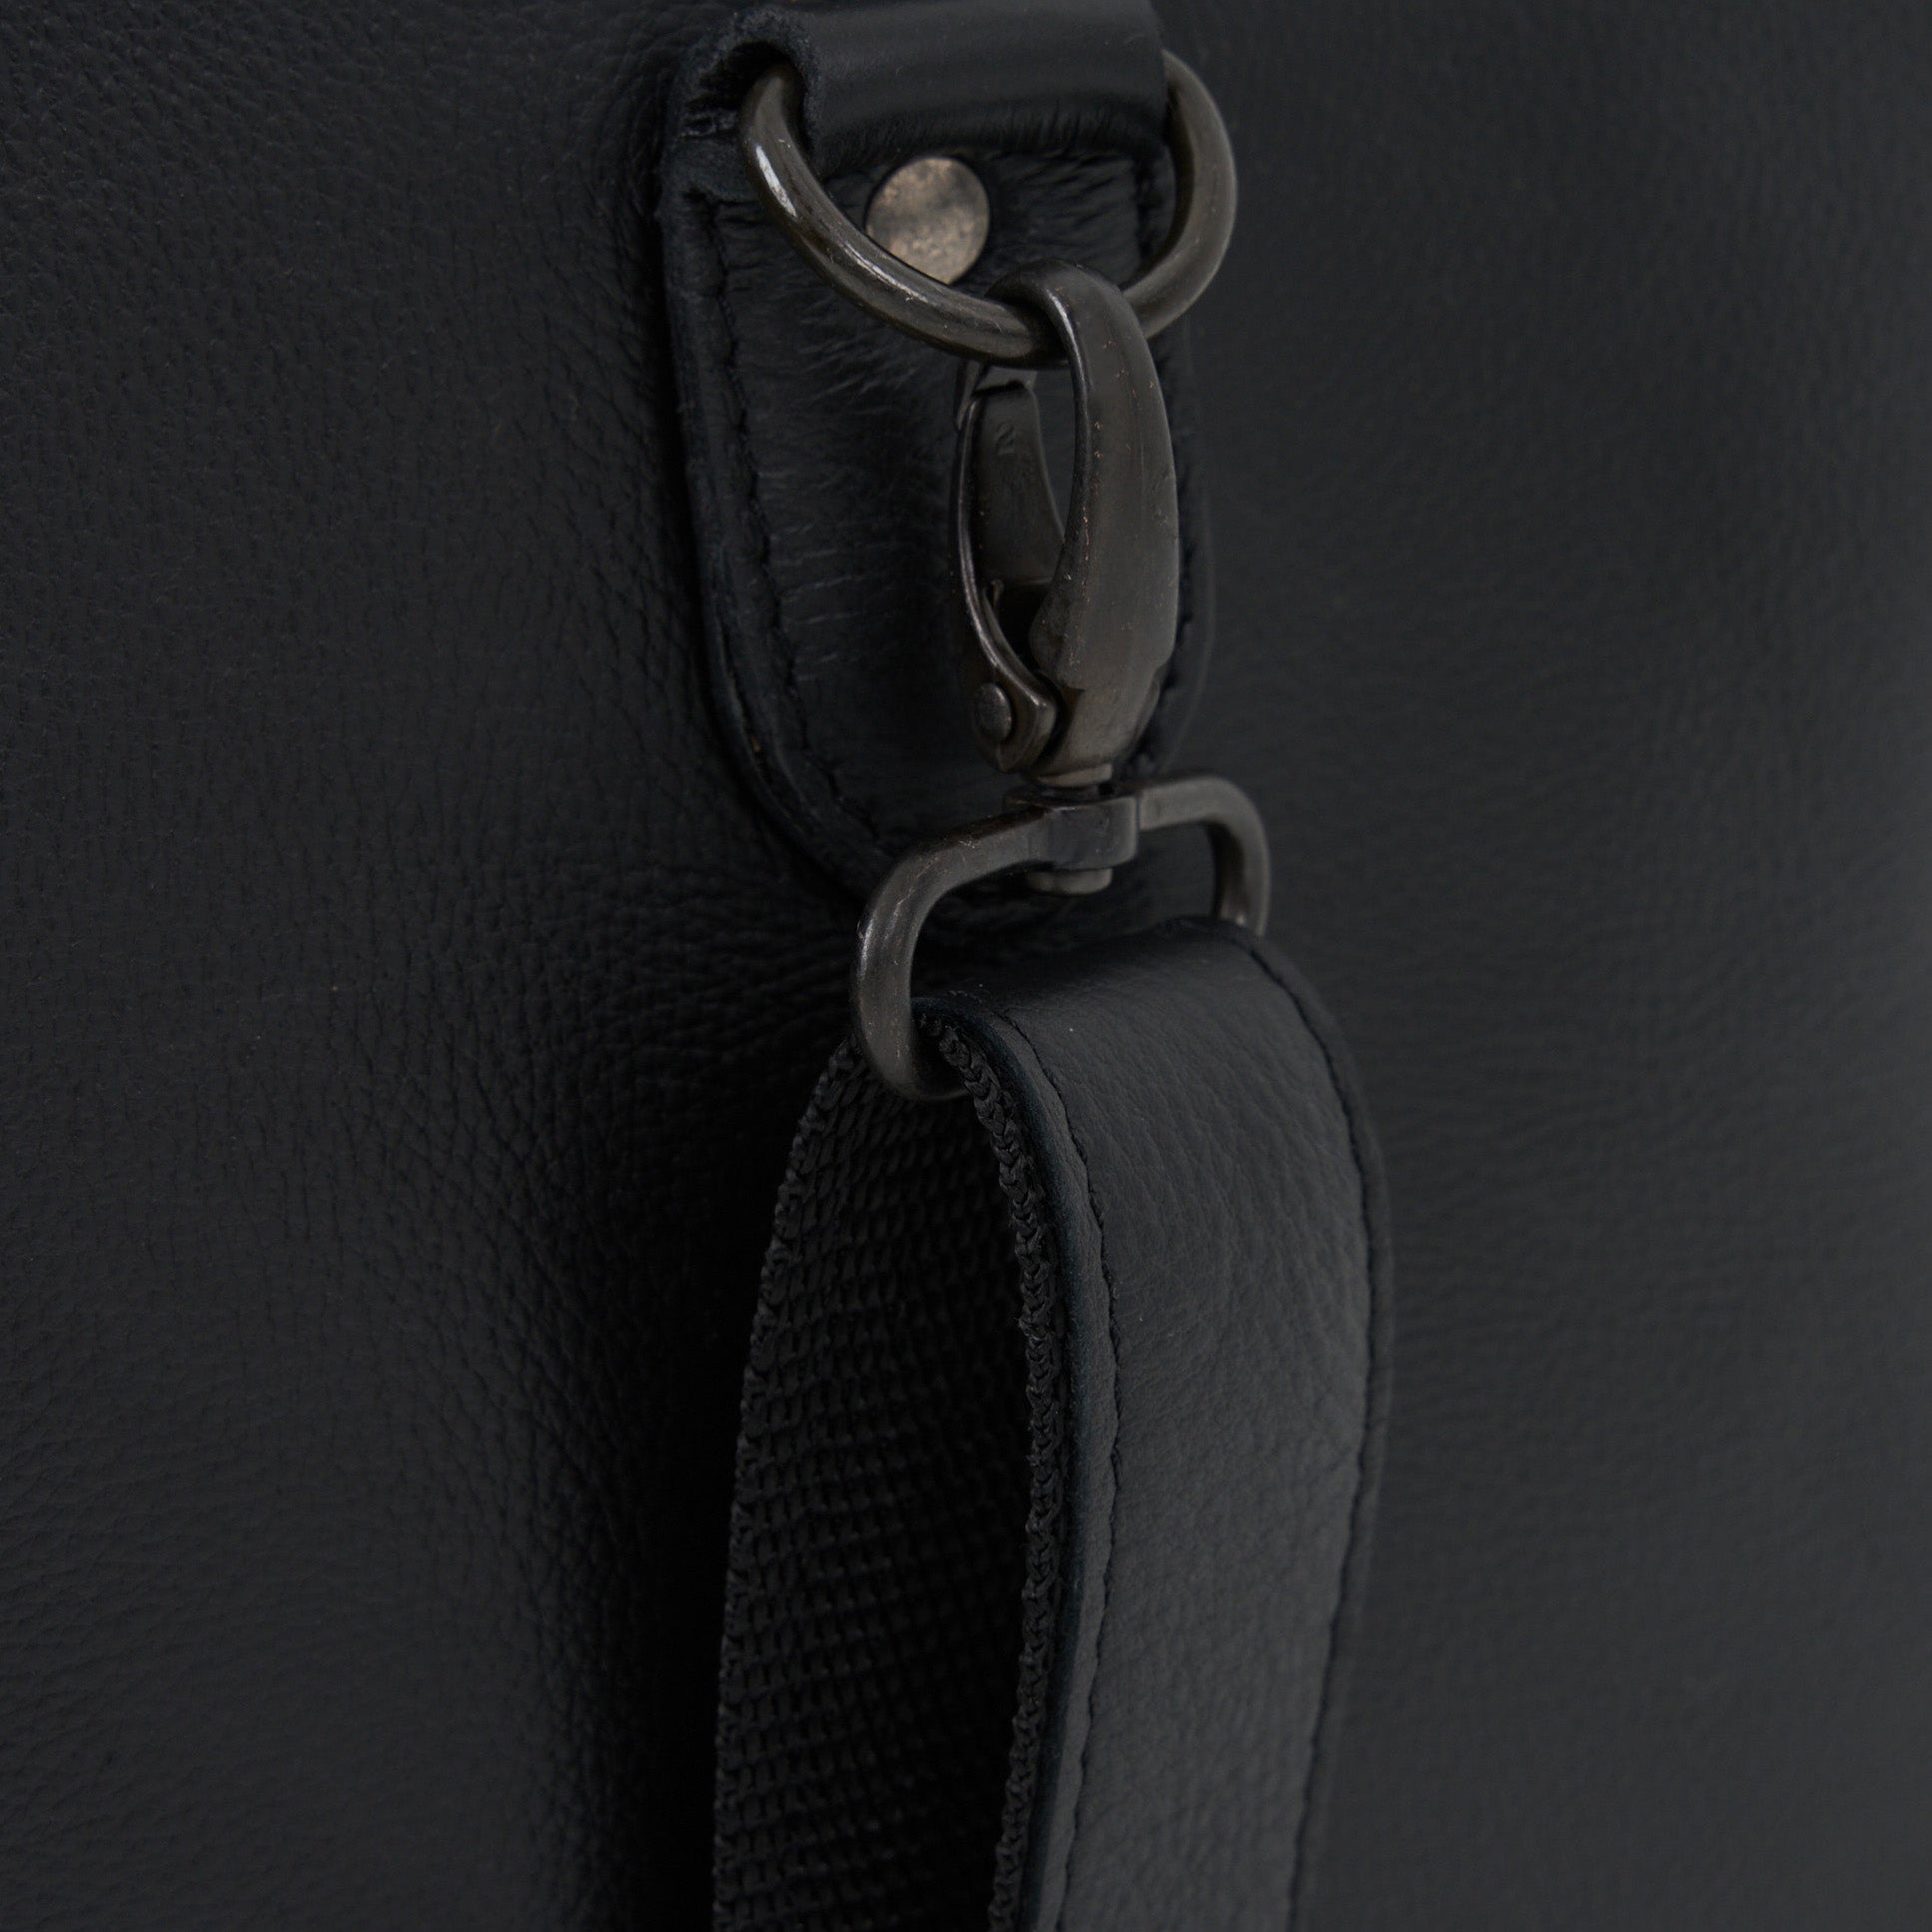 Strap detail on Black Genuine Leather Sports Duffel Bag with Waterproof Lining &amp; Sneaker Compartment